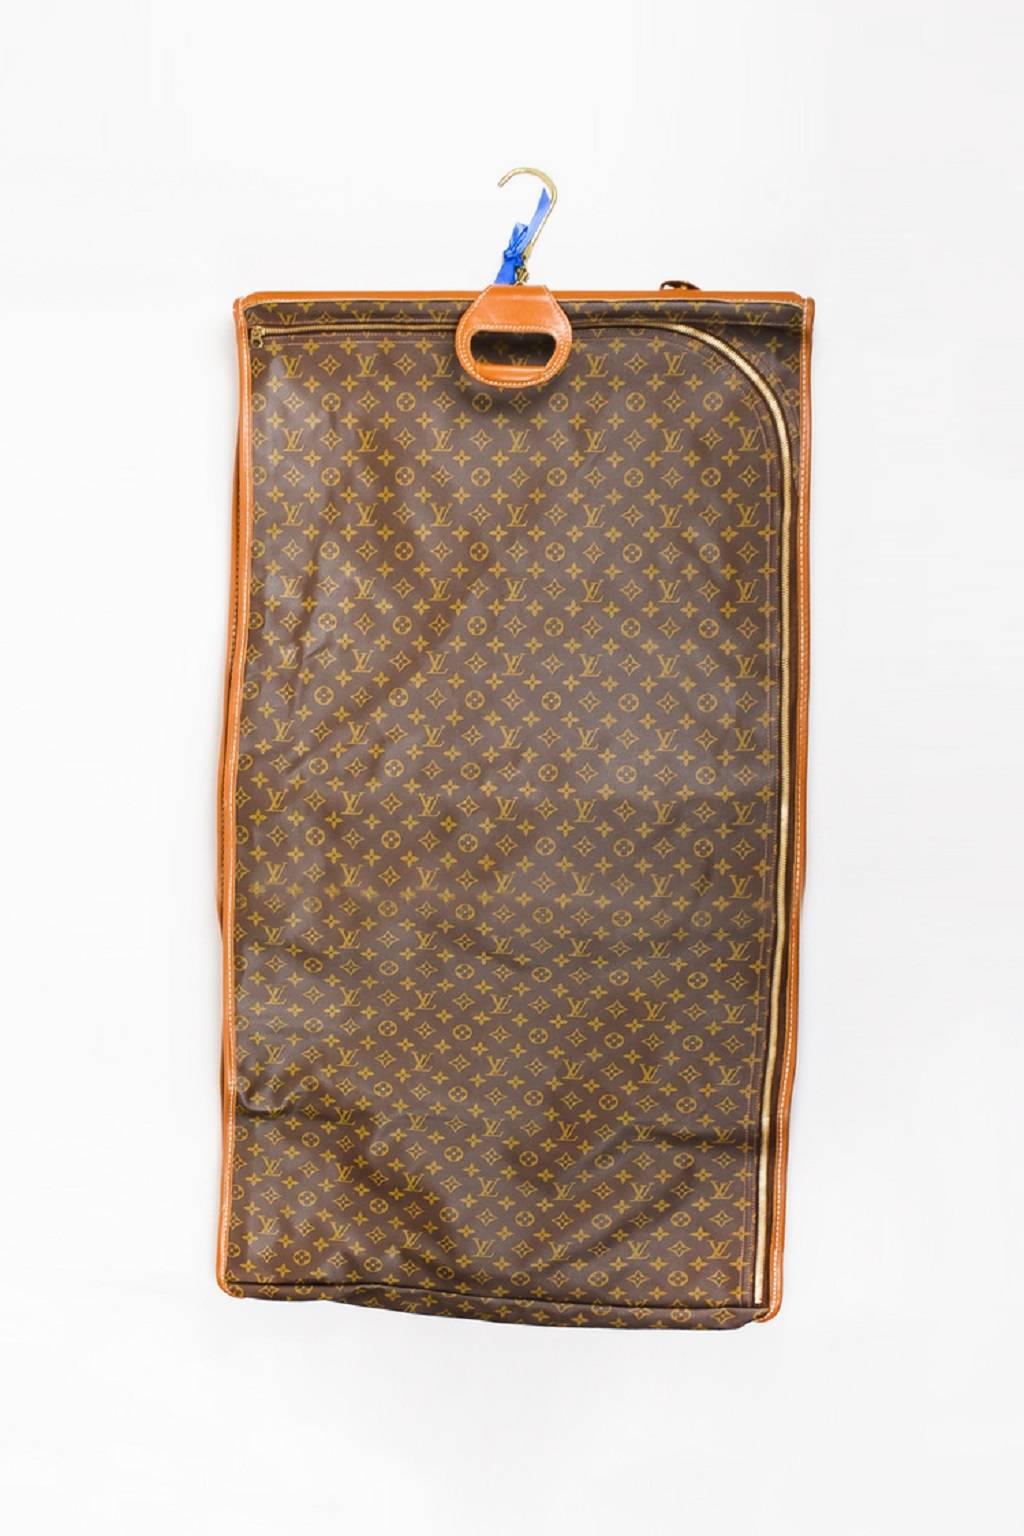 Vintage Louis Vuitton The French Luggage Co. Brown Canvas Leather Garment Bag In Fair Condition For Sale In Chicago, IL